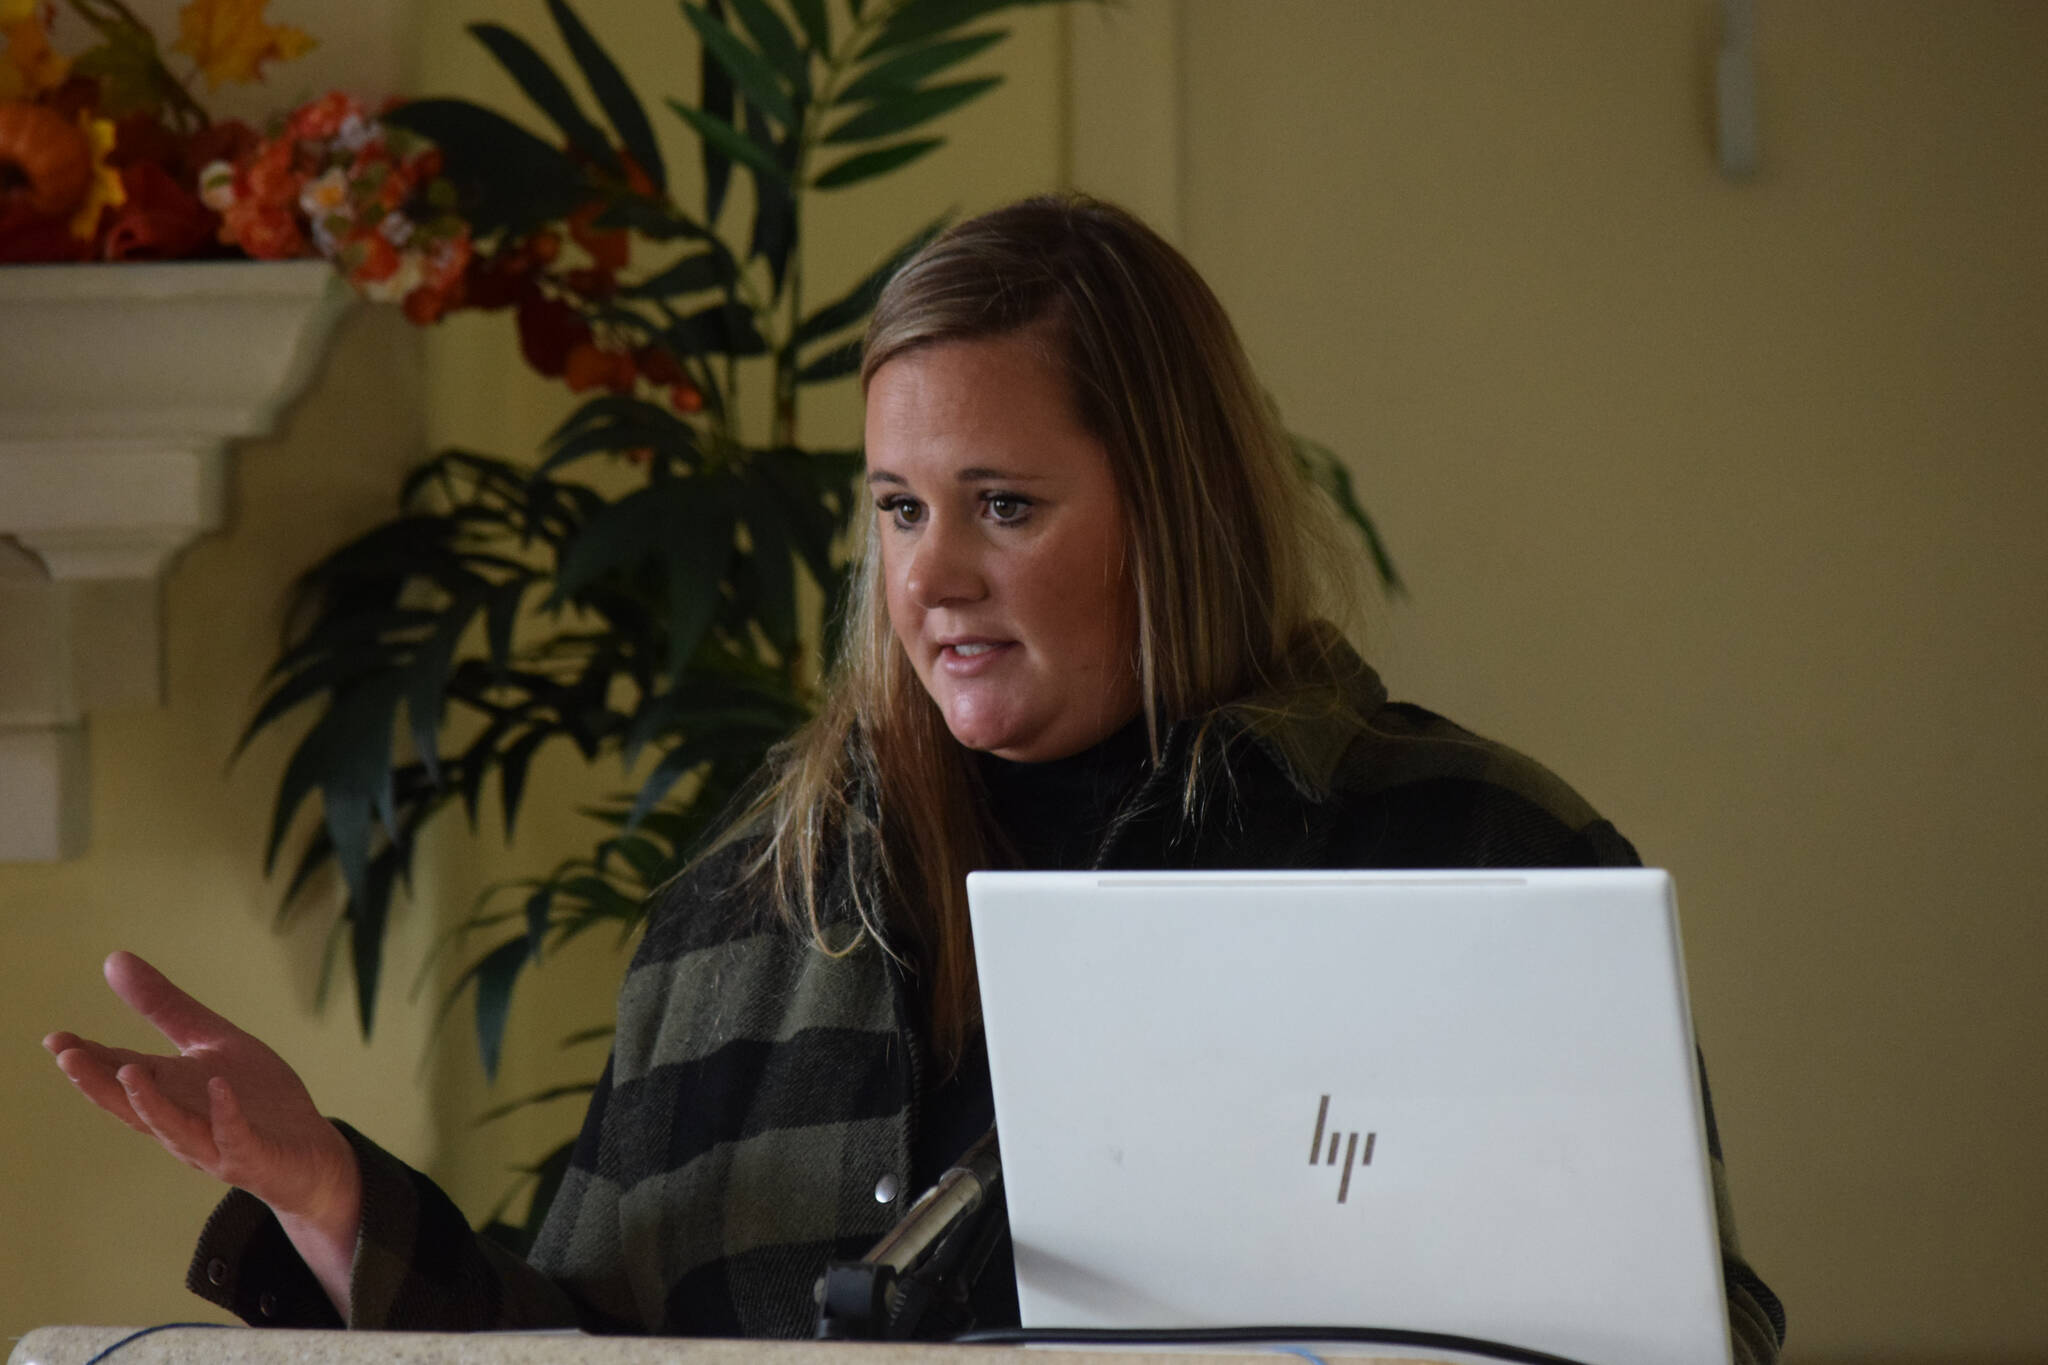 Abby Struffert discusses the Ladies First breast and cervical cancer screening program at the joint Kenai and Soldotna Chamber meeting in Soldotna on Wednesday, Oct. 13, 2021. (Camille Botello/Peninsula Clarion)